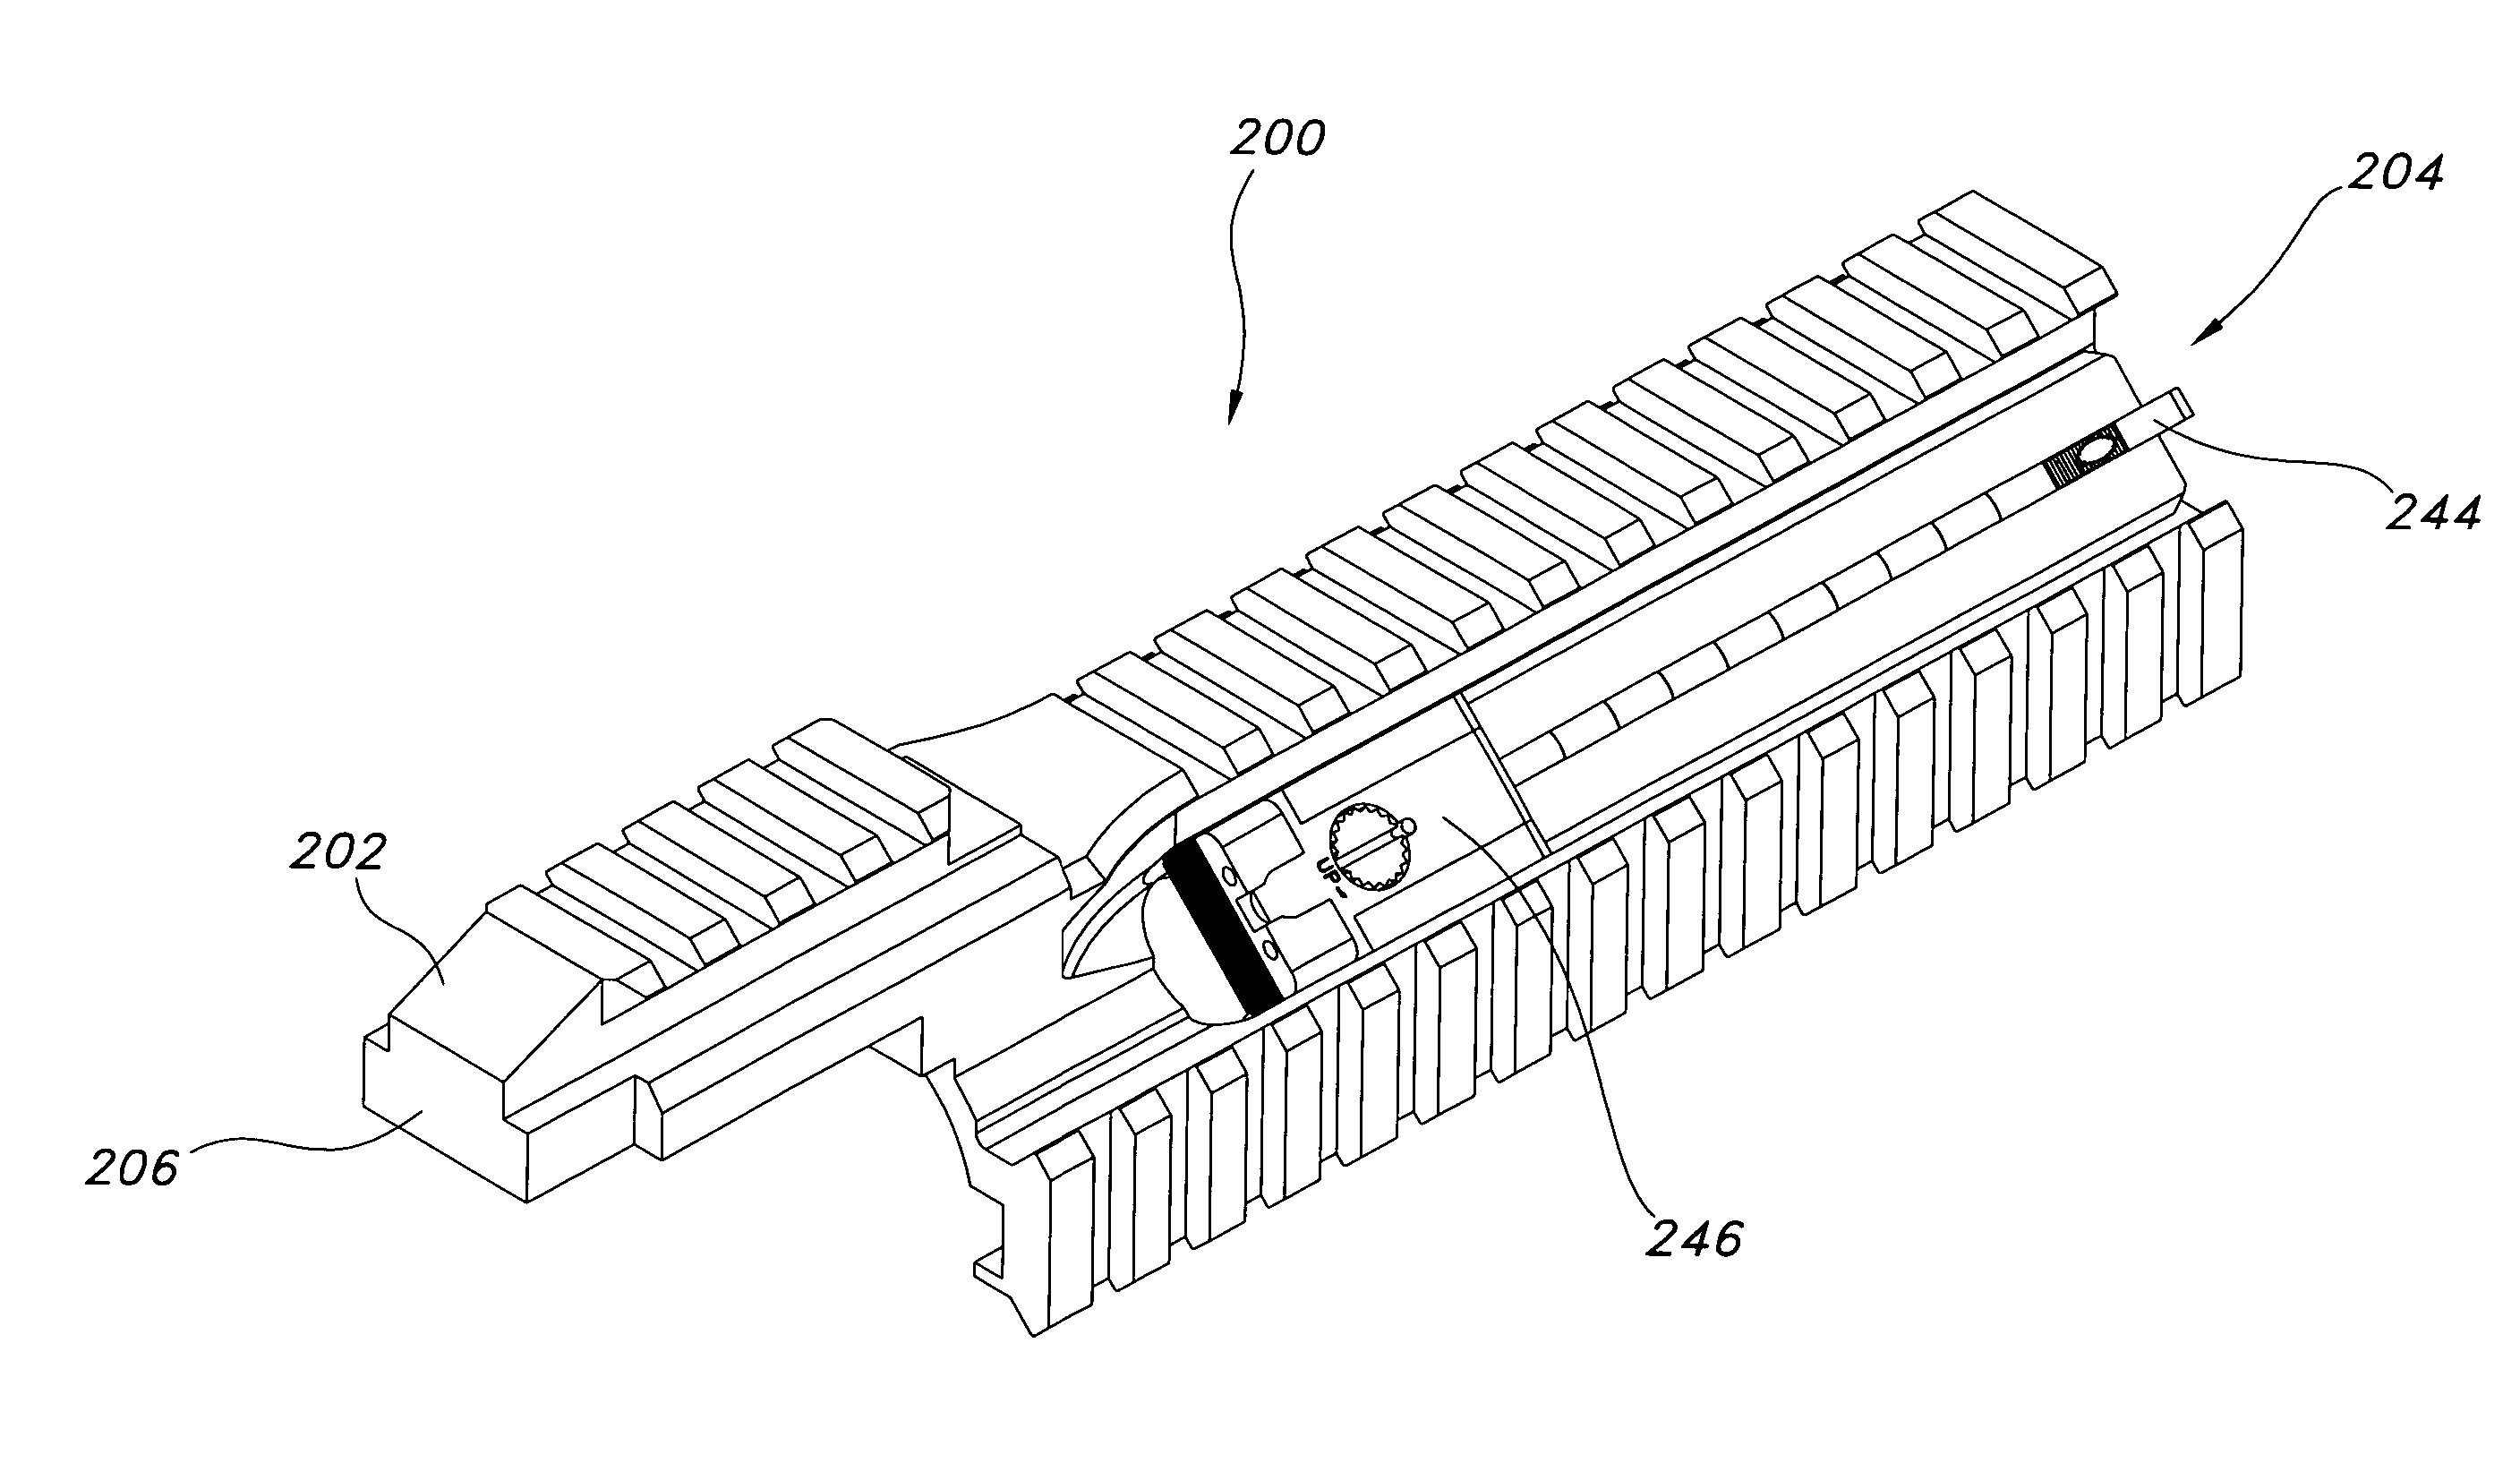 Assault rifle back-up sight rib and support structure